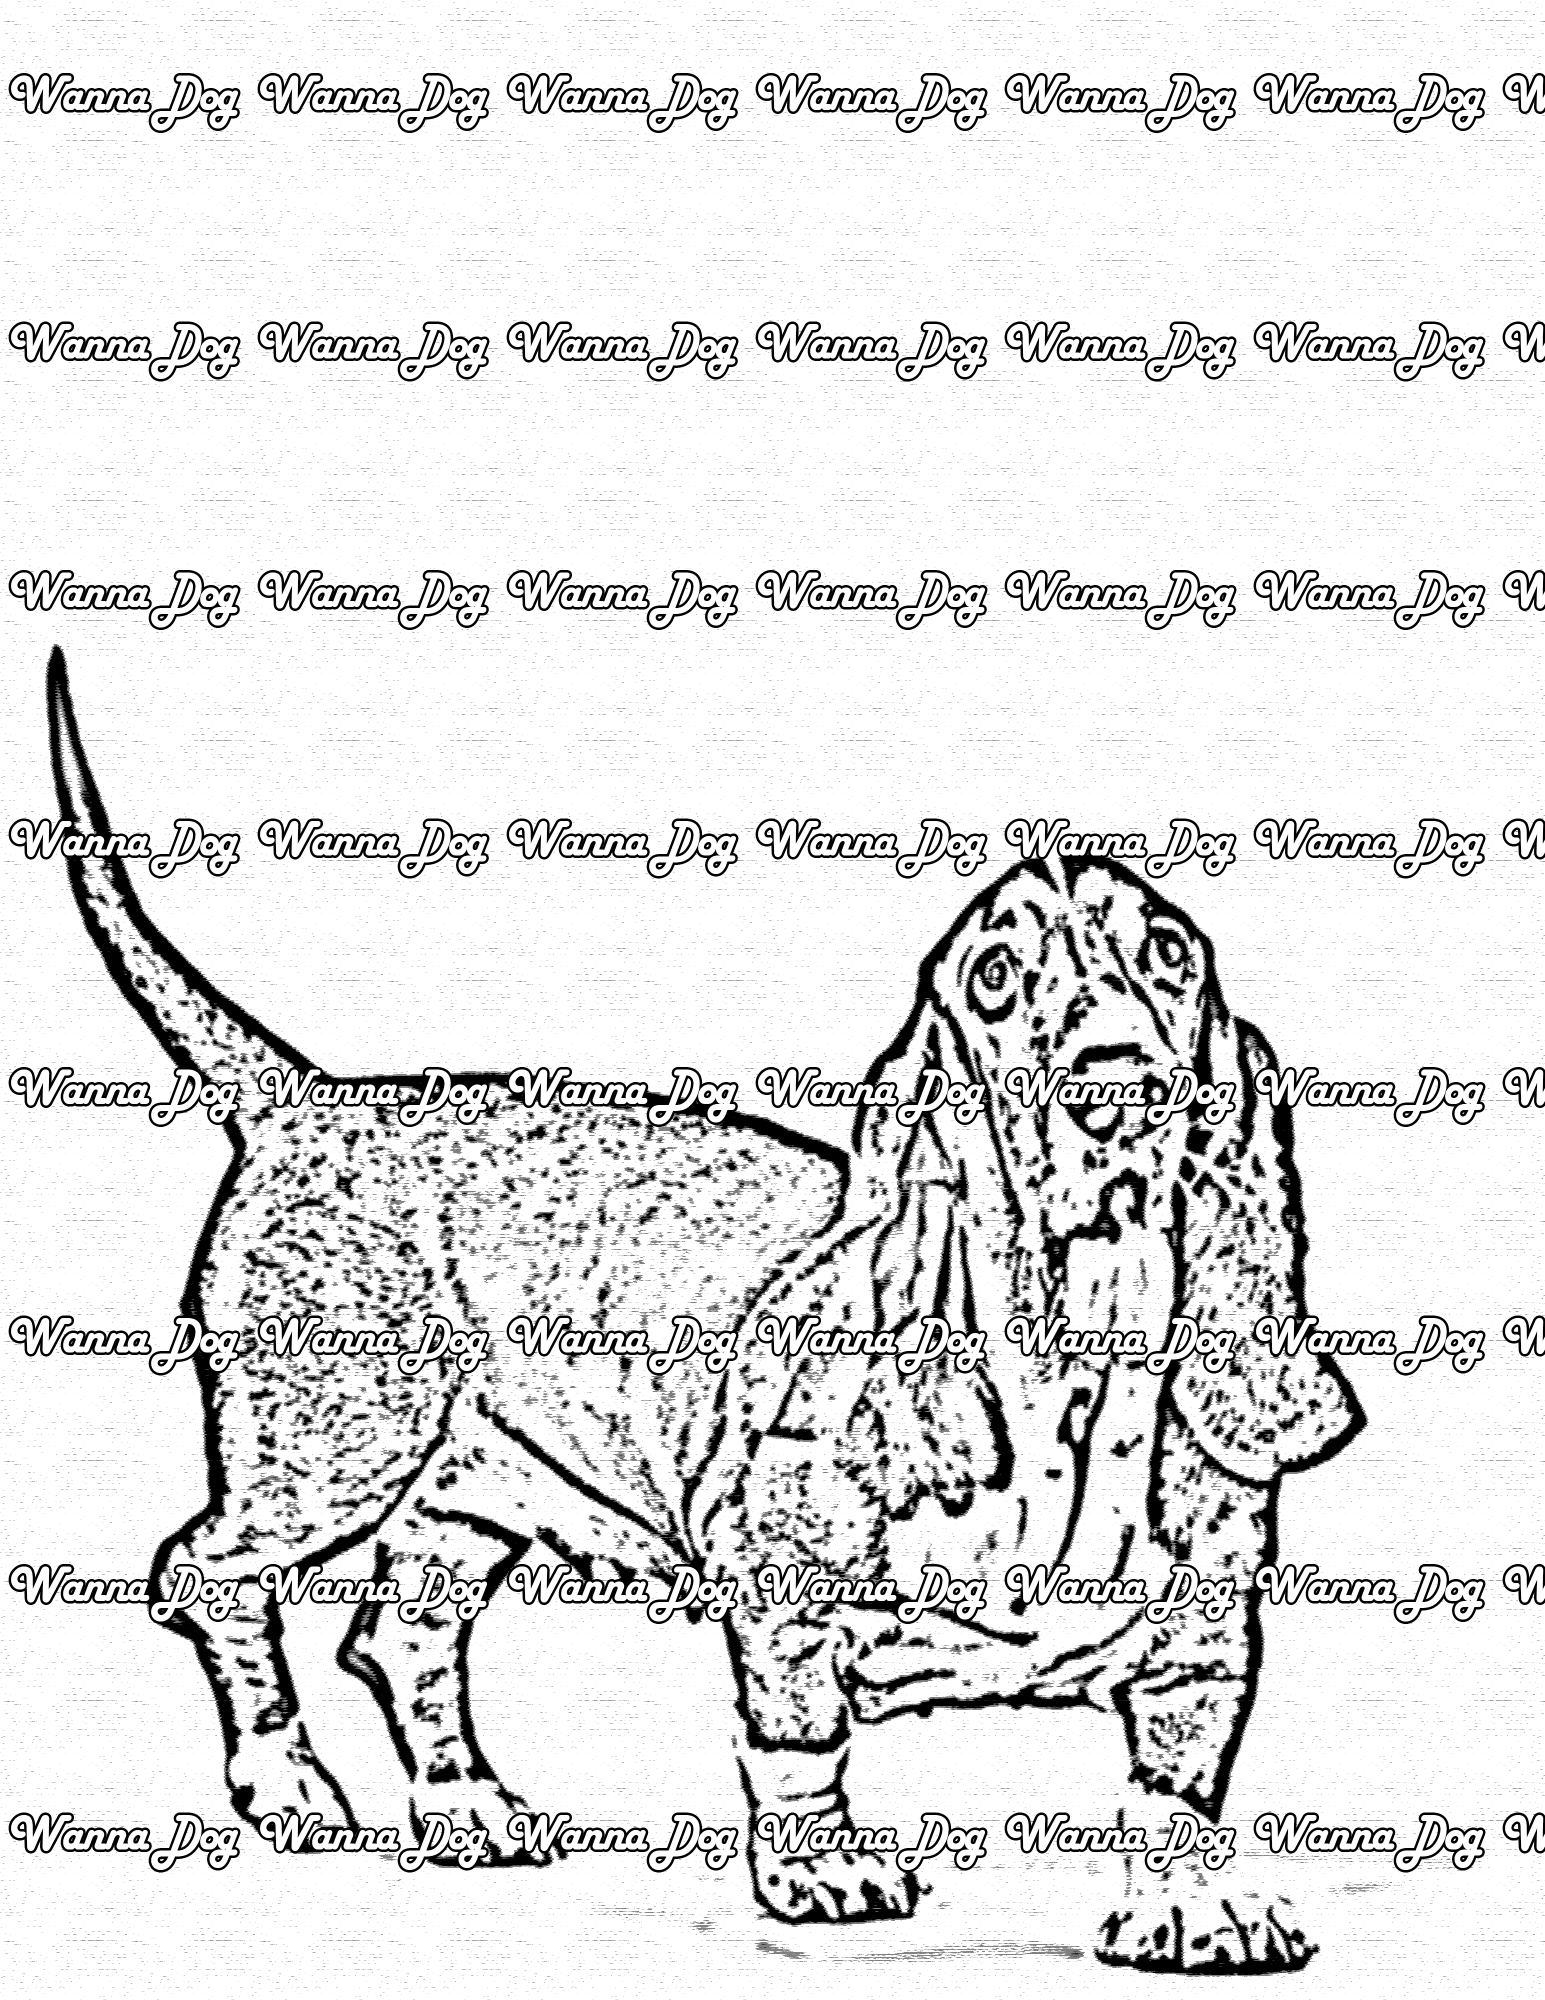 Basset Hound Coloring Page of a Basset Hound standing and posing